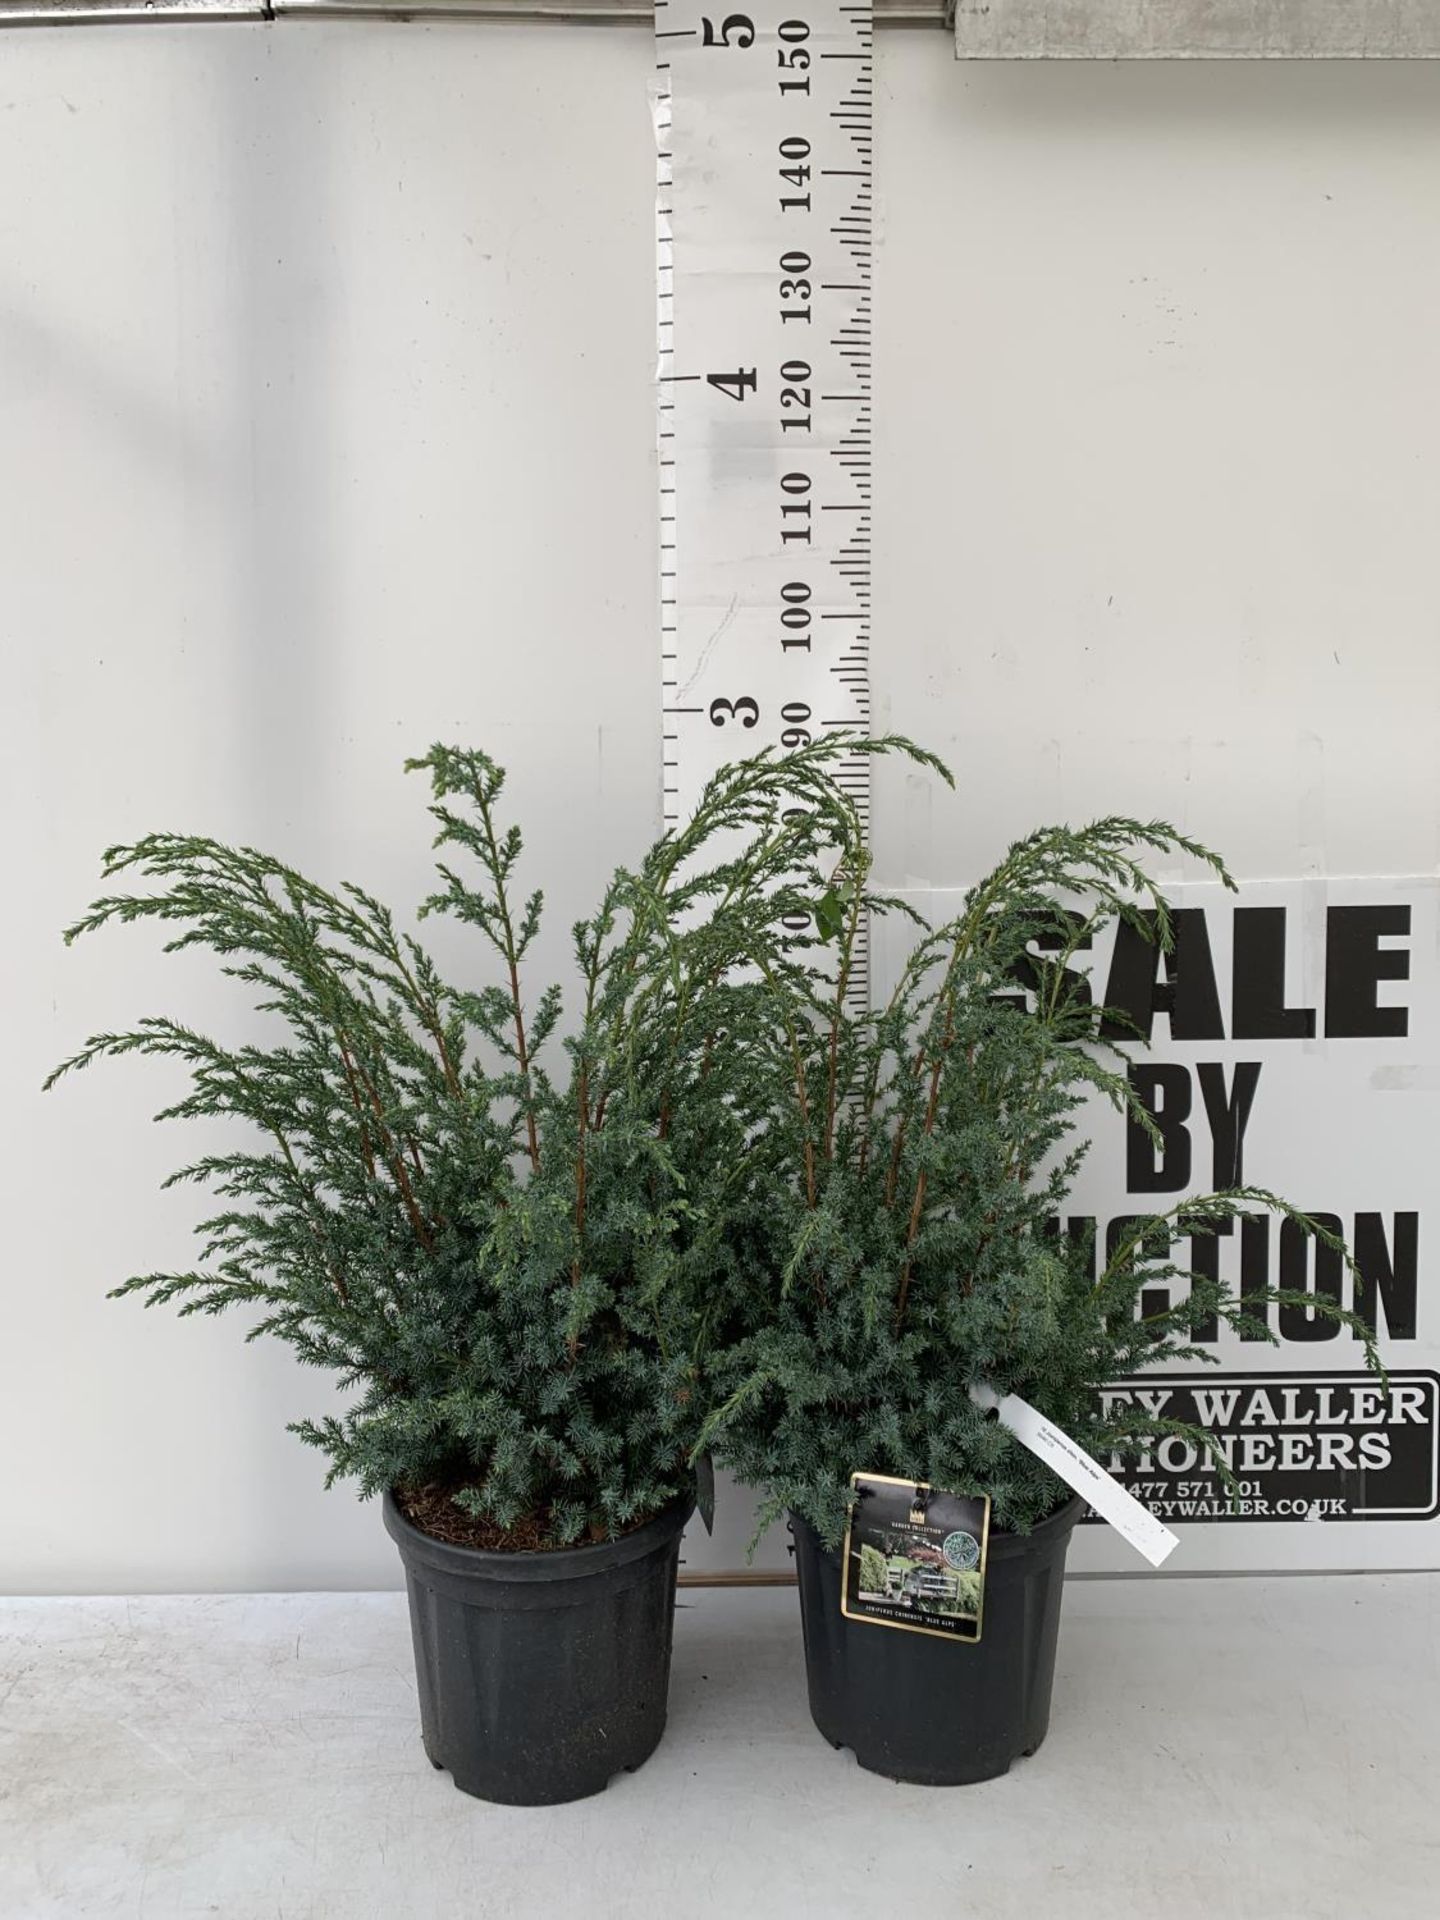 TWO JUNIPERUS CHINENSIS BLUE ALPS IN 7 LTR POTS A METRE IN HEIGHT PLUS VAT TO BE SOLD FOR THE TWO - Image 2 of 11